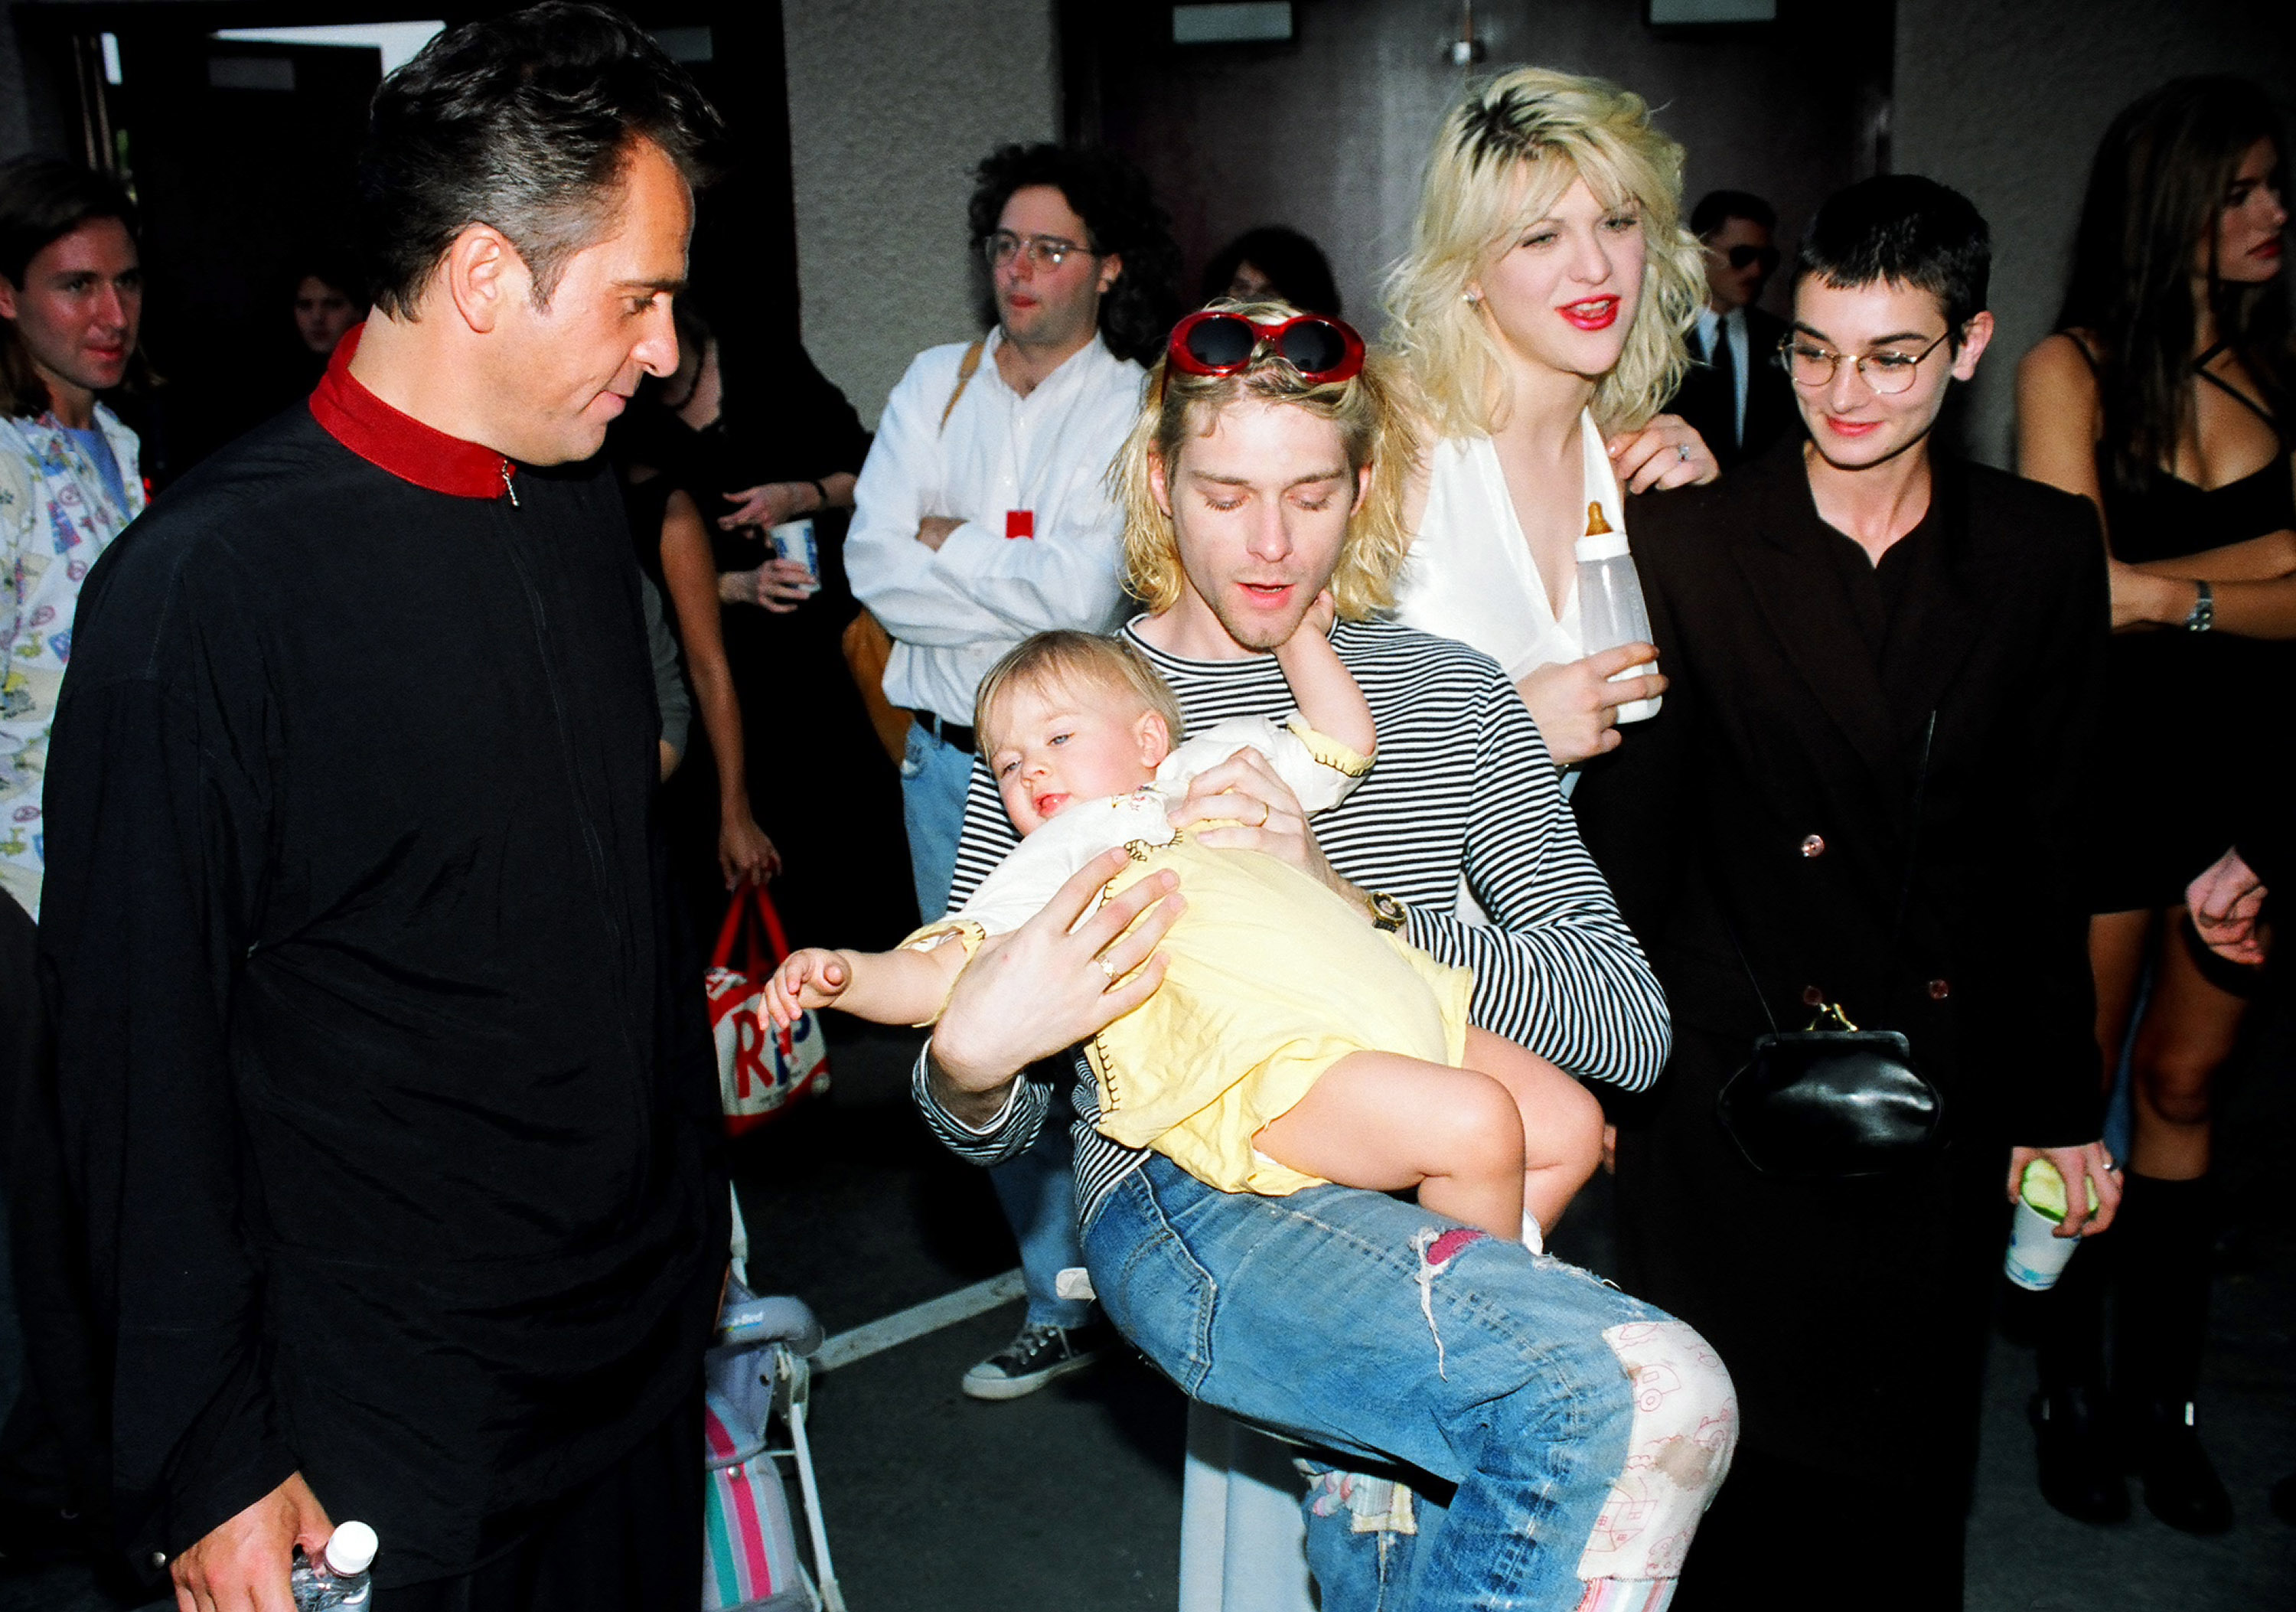 Peter Gabriel, Kurt Cobain of Nirvana with wife Courtney Love and daughter Frances Bean Cobain, and Sinead O'Connor (Photo by